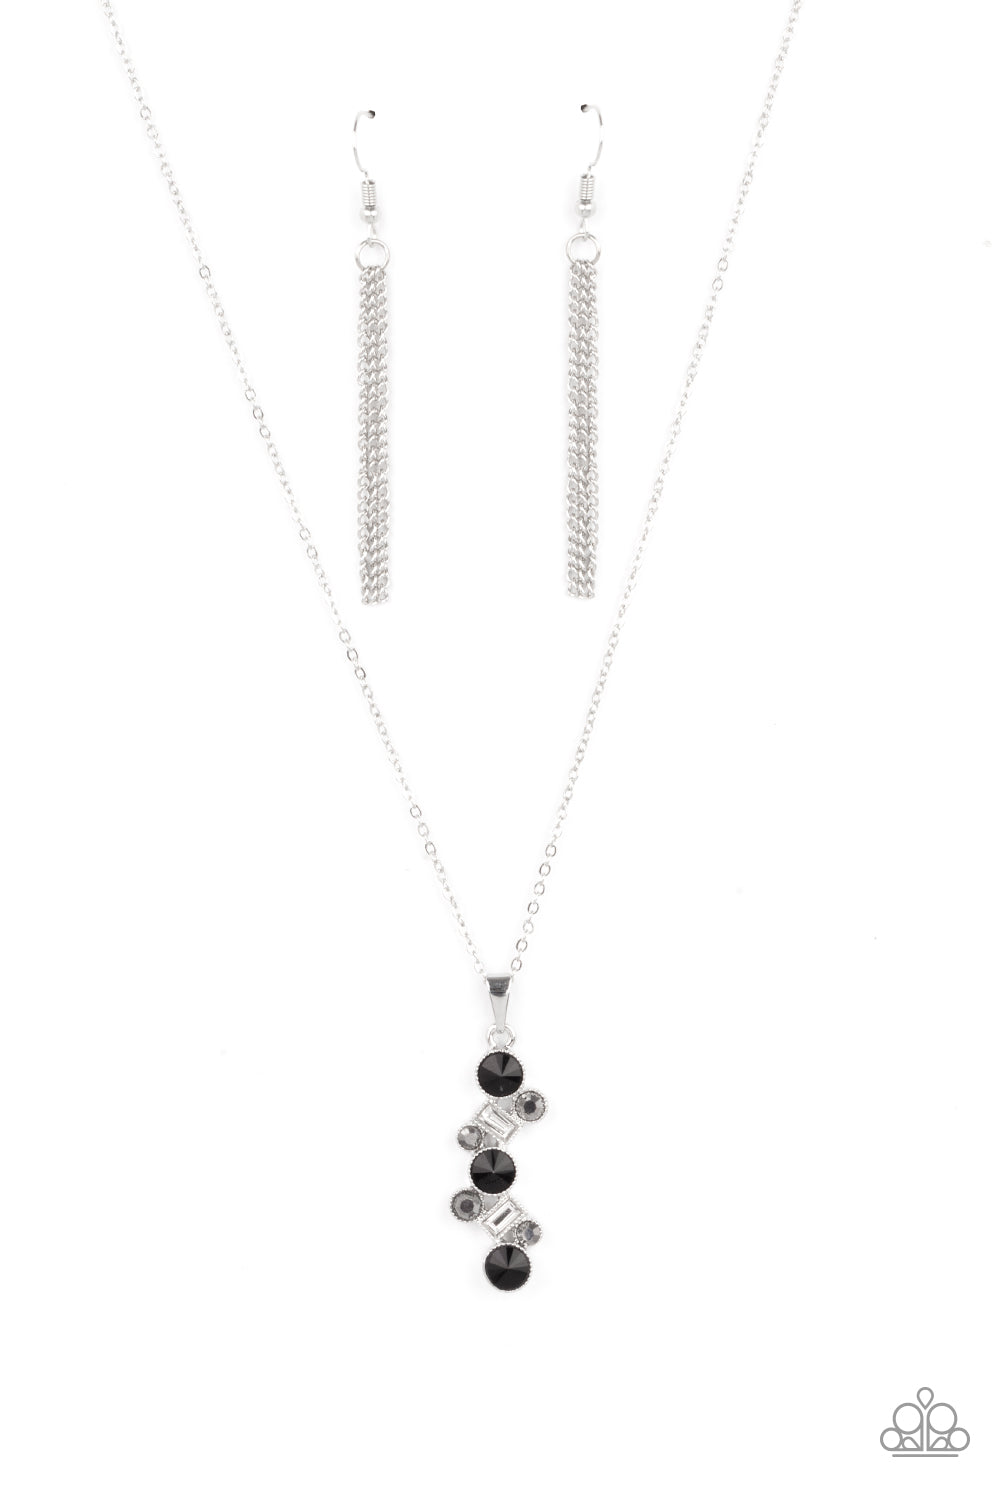 Classically Clustered - black - Paparazzi necklace